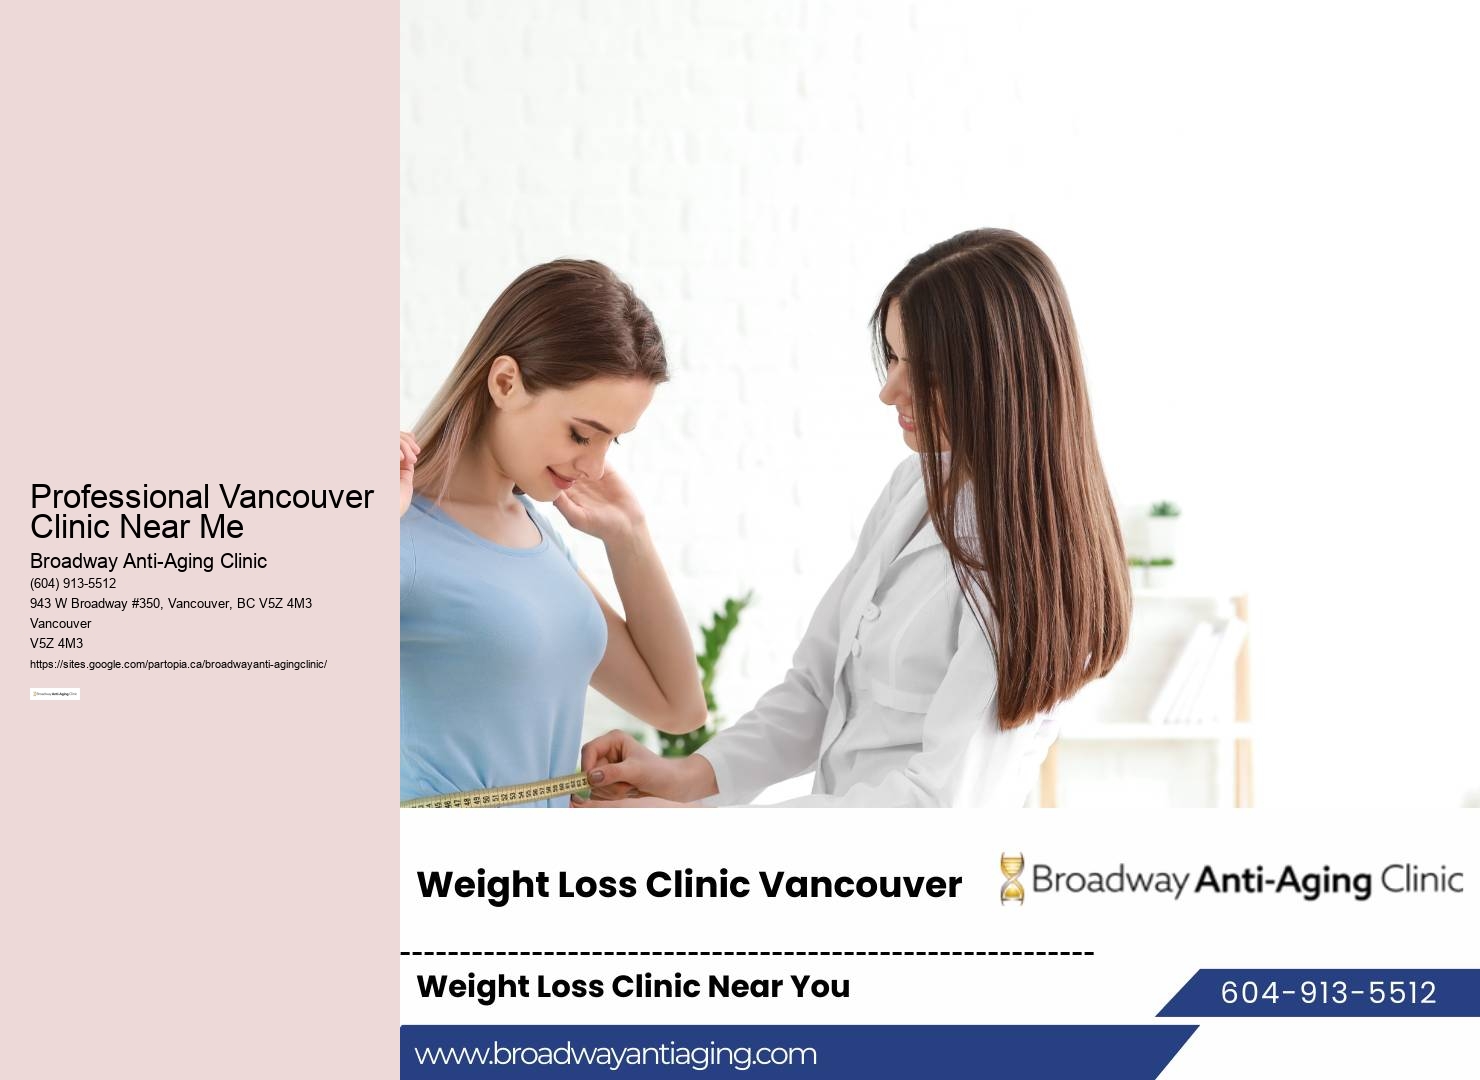 Professional Vancouver Clinic Near Me